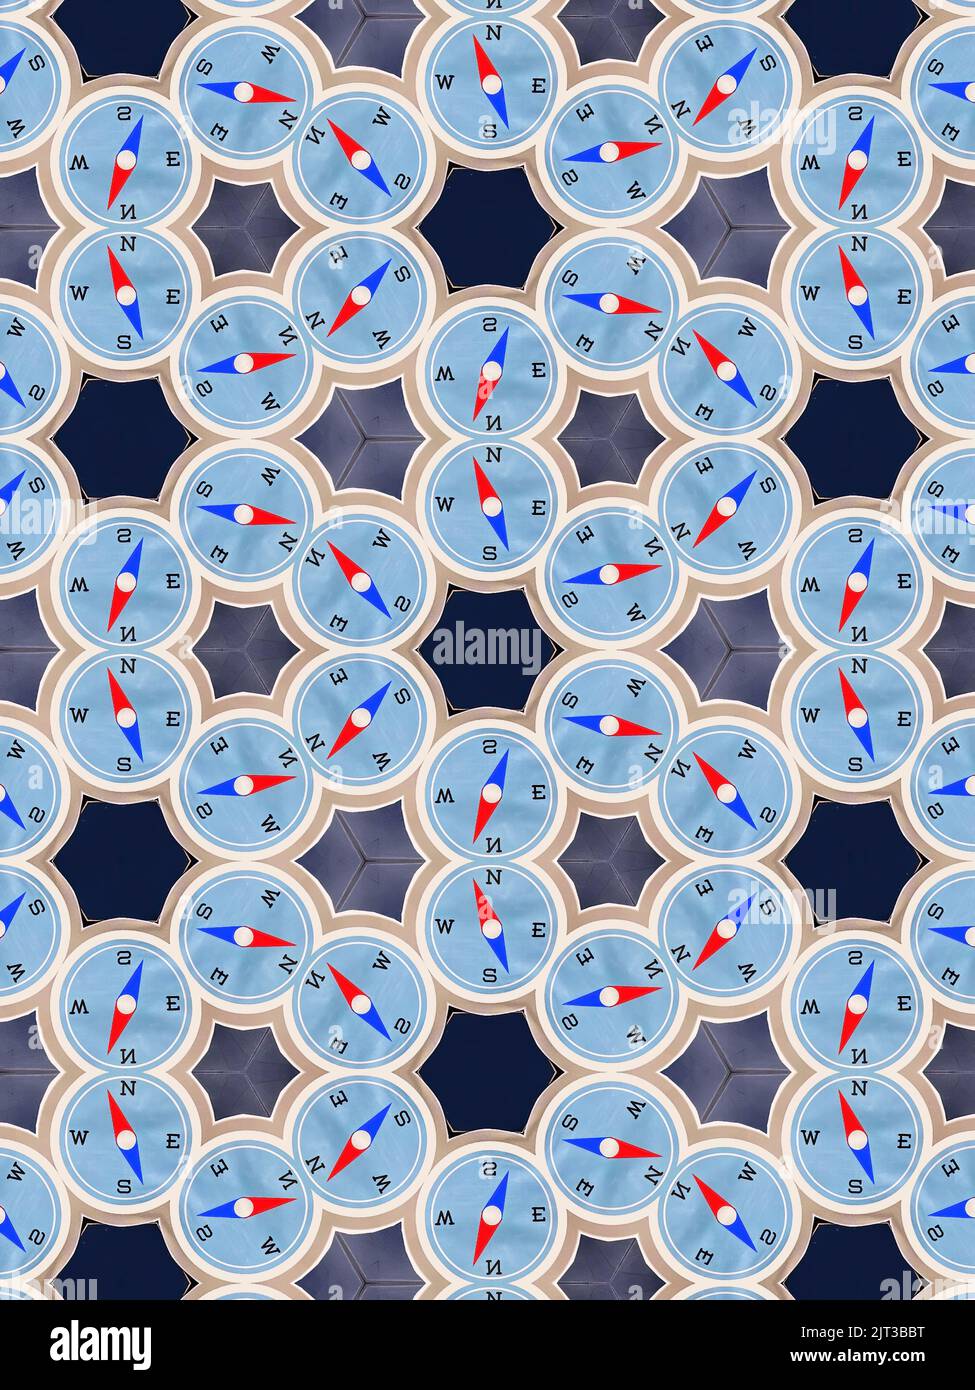 Kaleidoscope Pattern - Abstract Travel Compass Background Design. Stock Photo